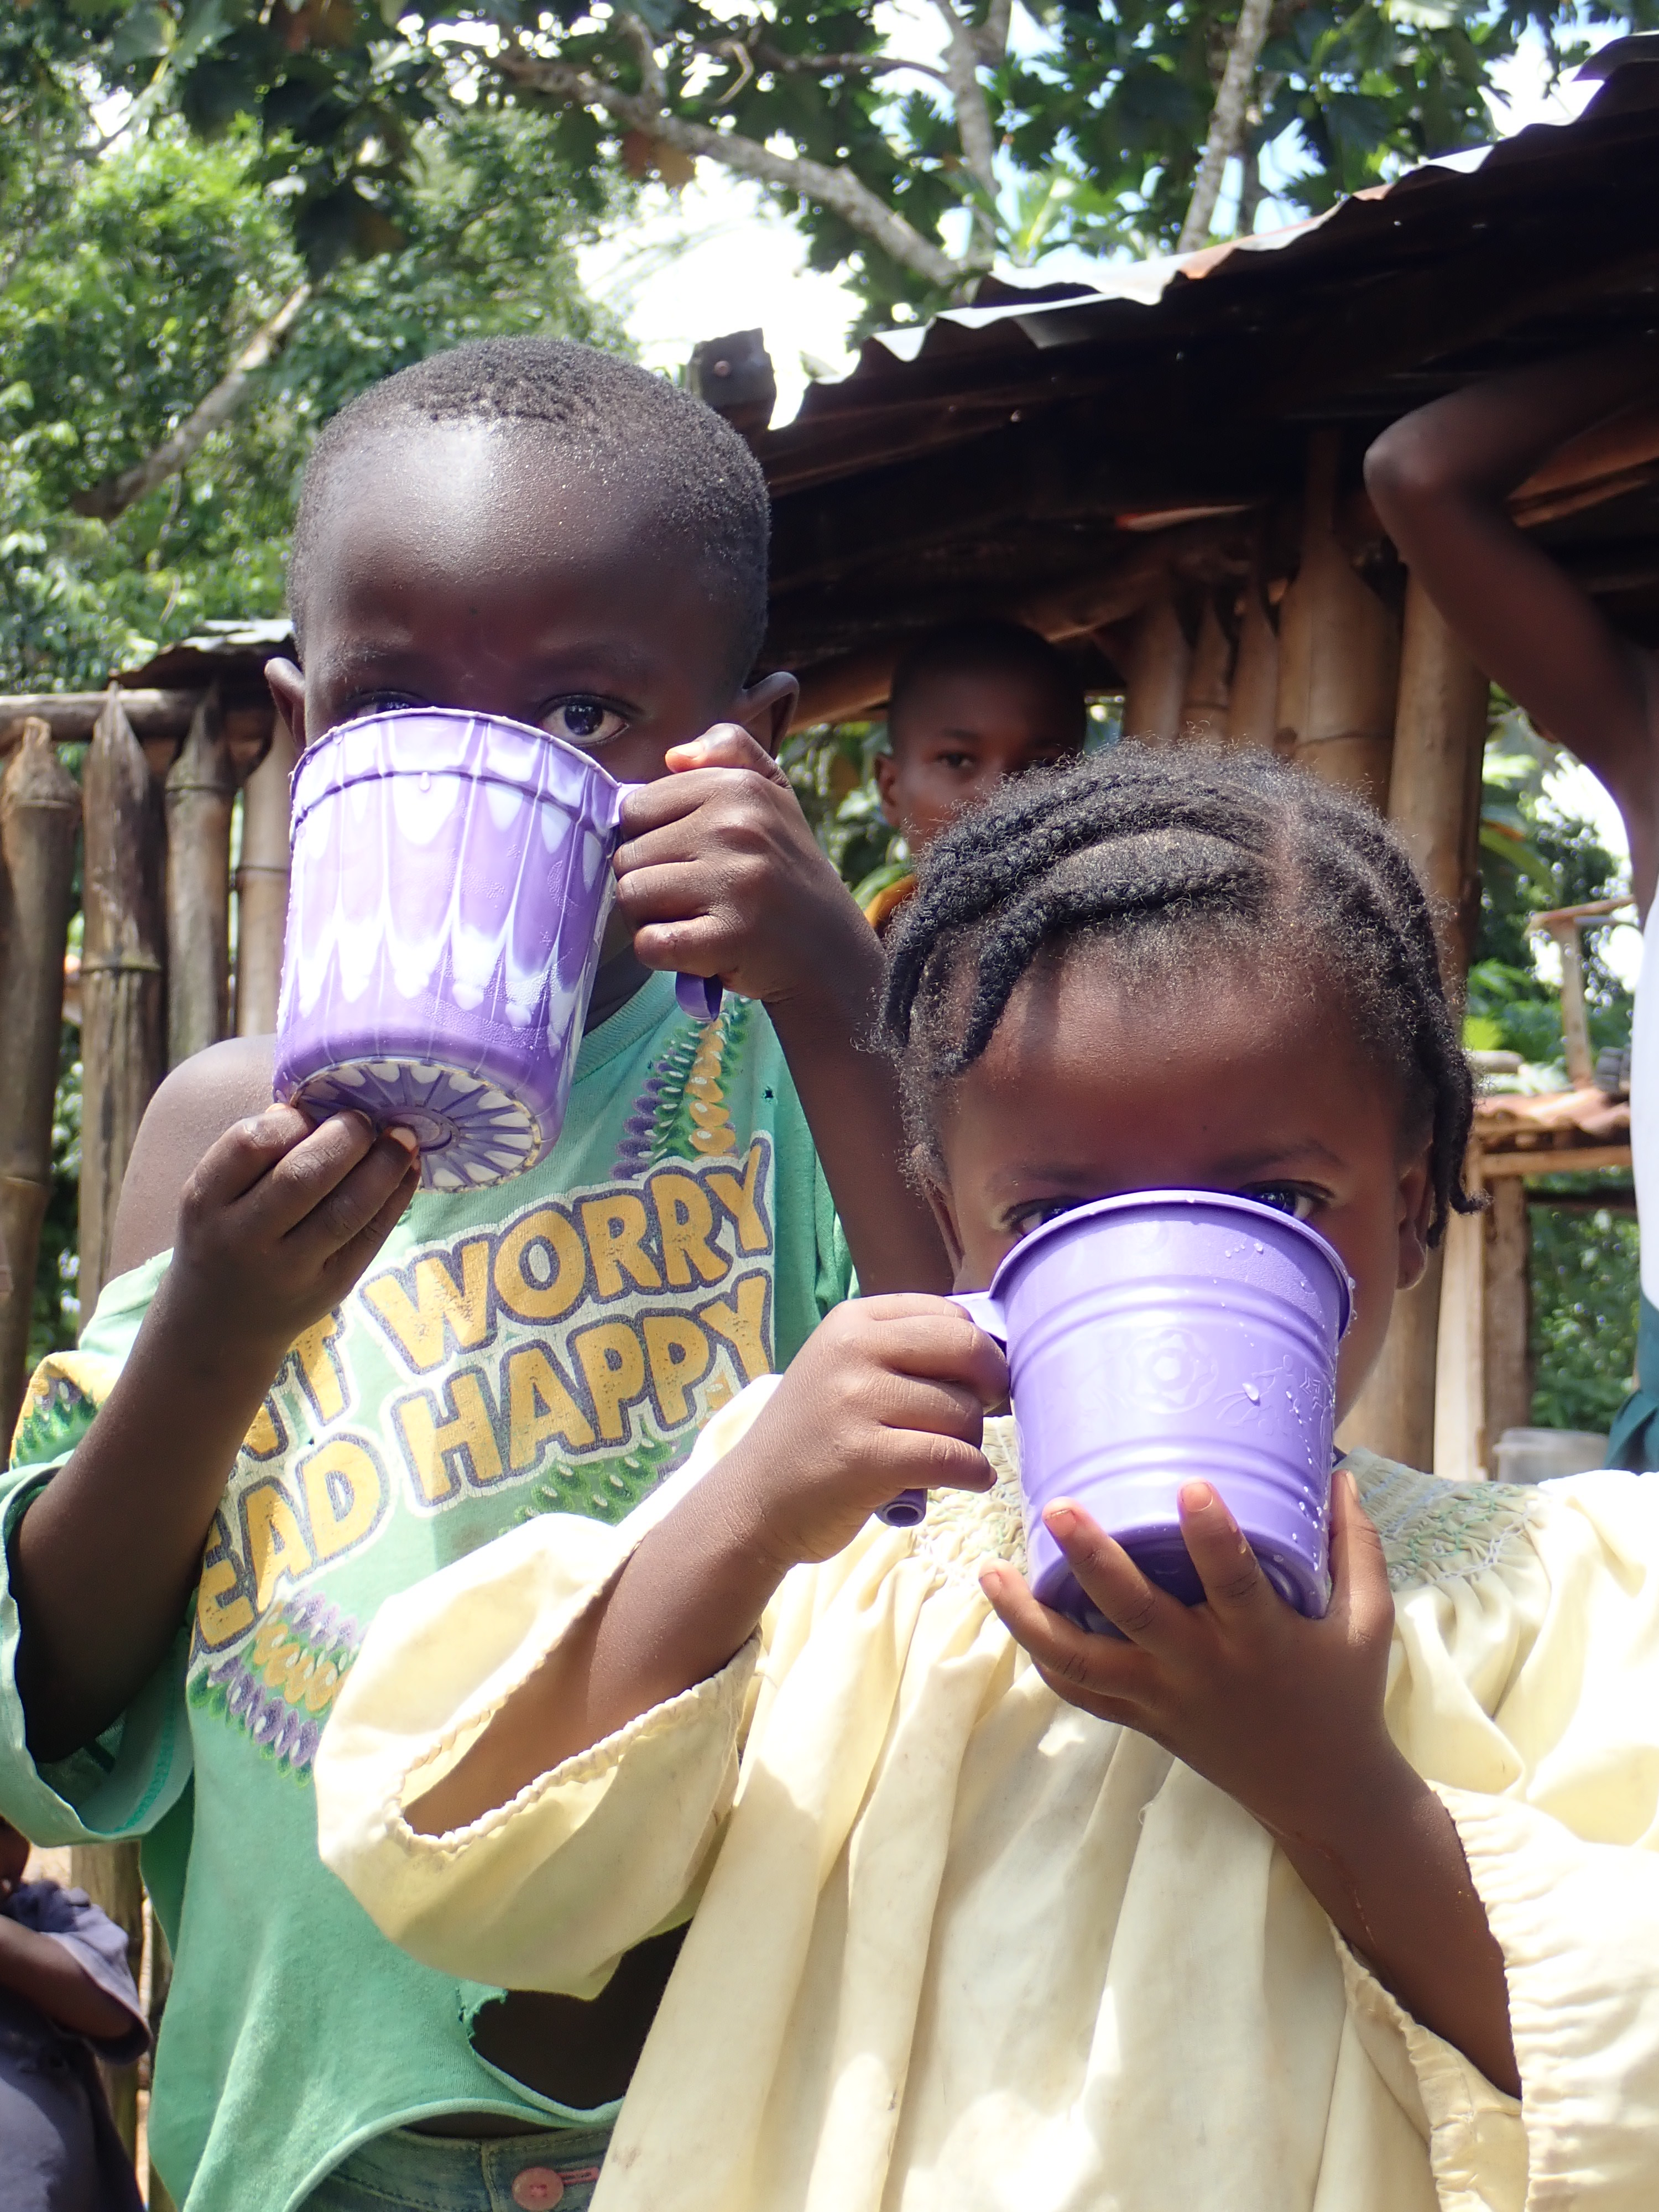 Good Equipment = More Safe Drinking Water!